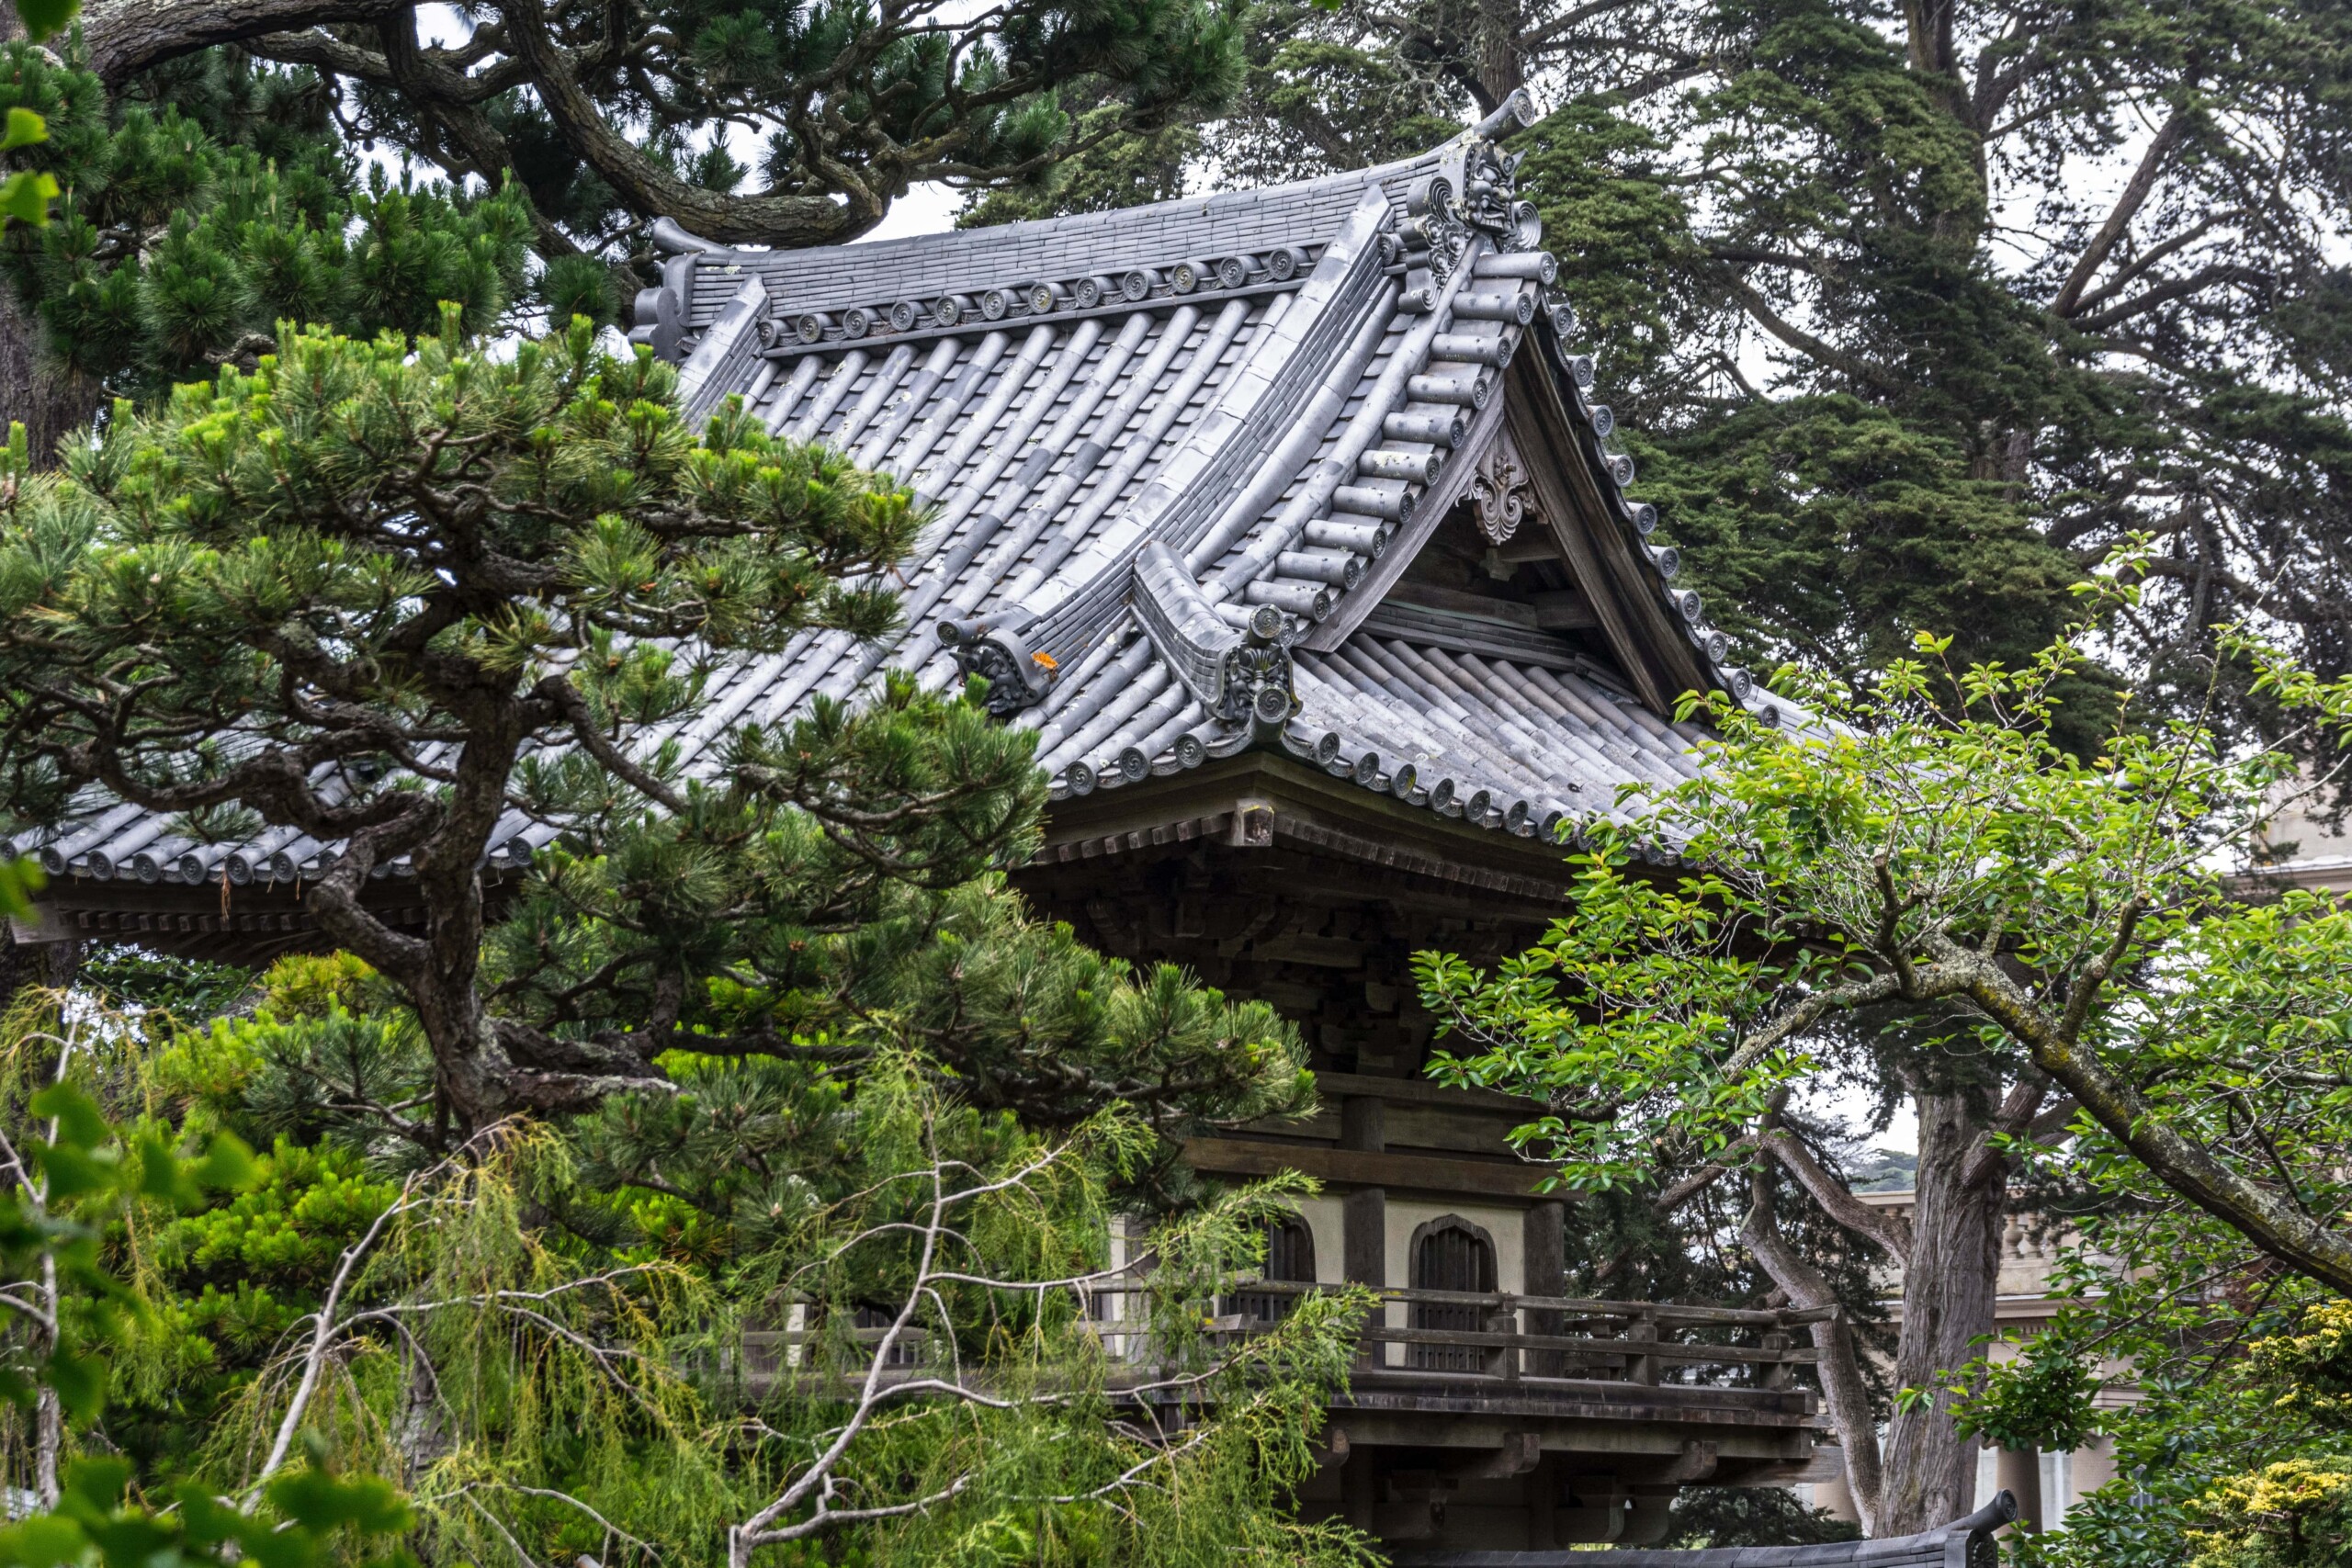 Japanese architecture in San Francisco's Golden Gate Park